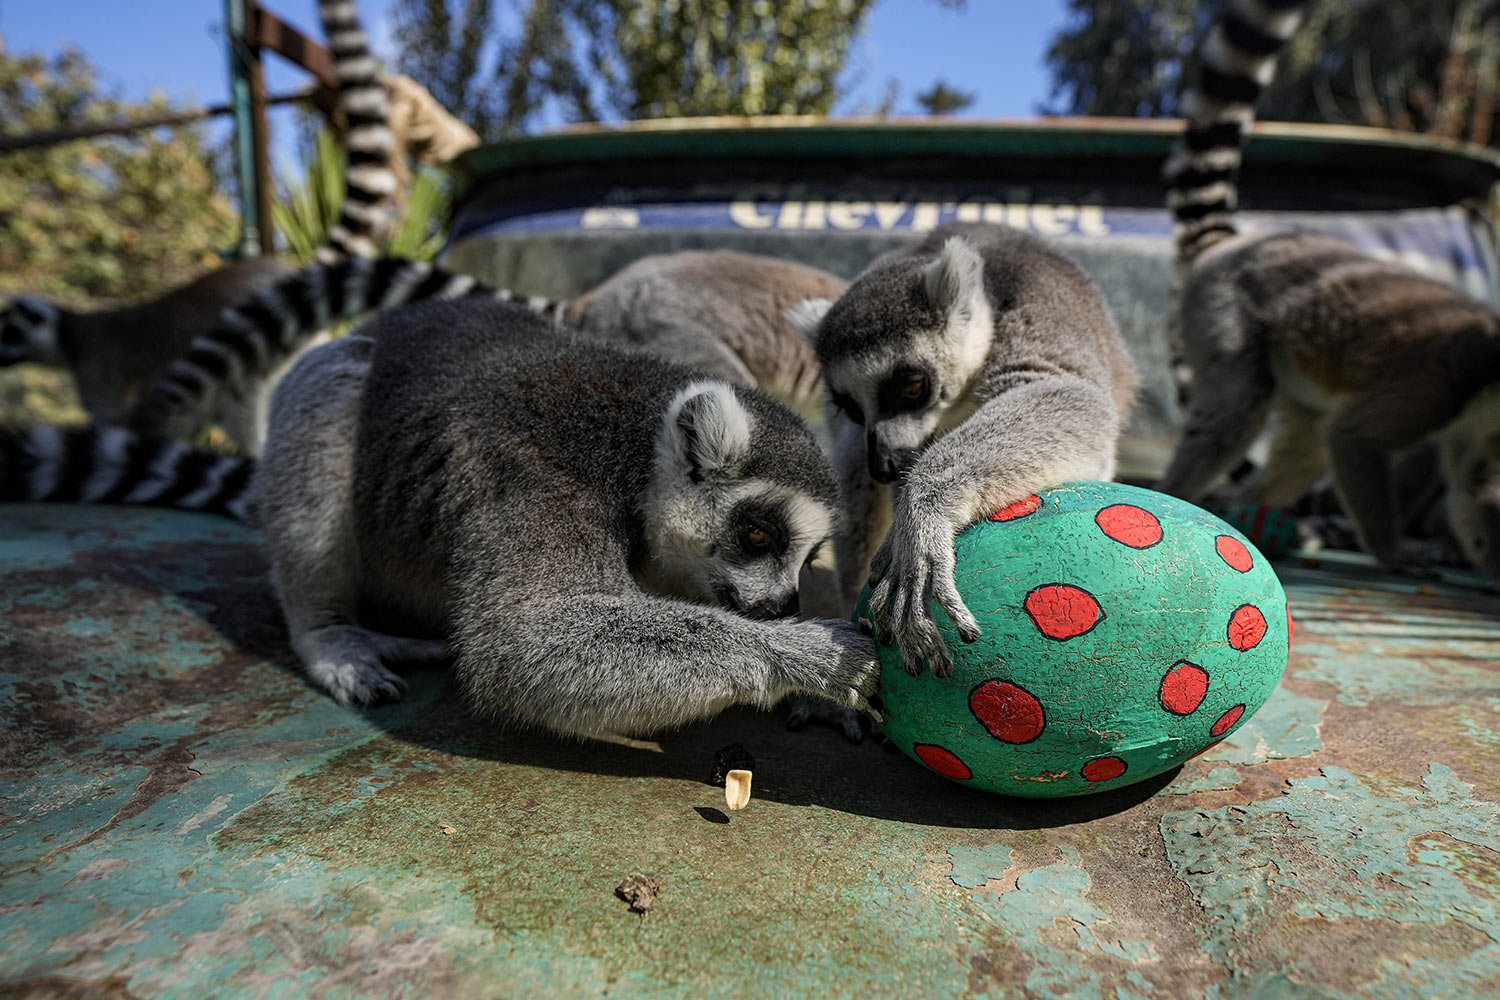  Ring-tailed lemurs sit on the hood of a truck while searching for snacks in an Easter egg at the Buin Zoo in Santiago, Chile, April 17, 2021. The zoo gave some of its animals ostrich Easter eggs painted with non-toxic tempera and filled with the par